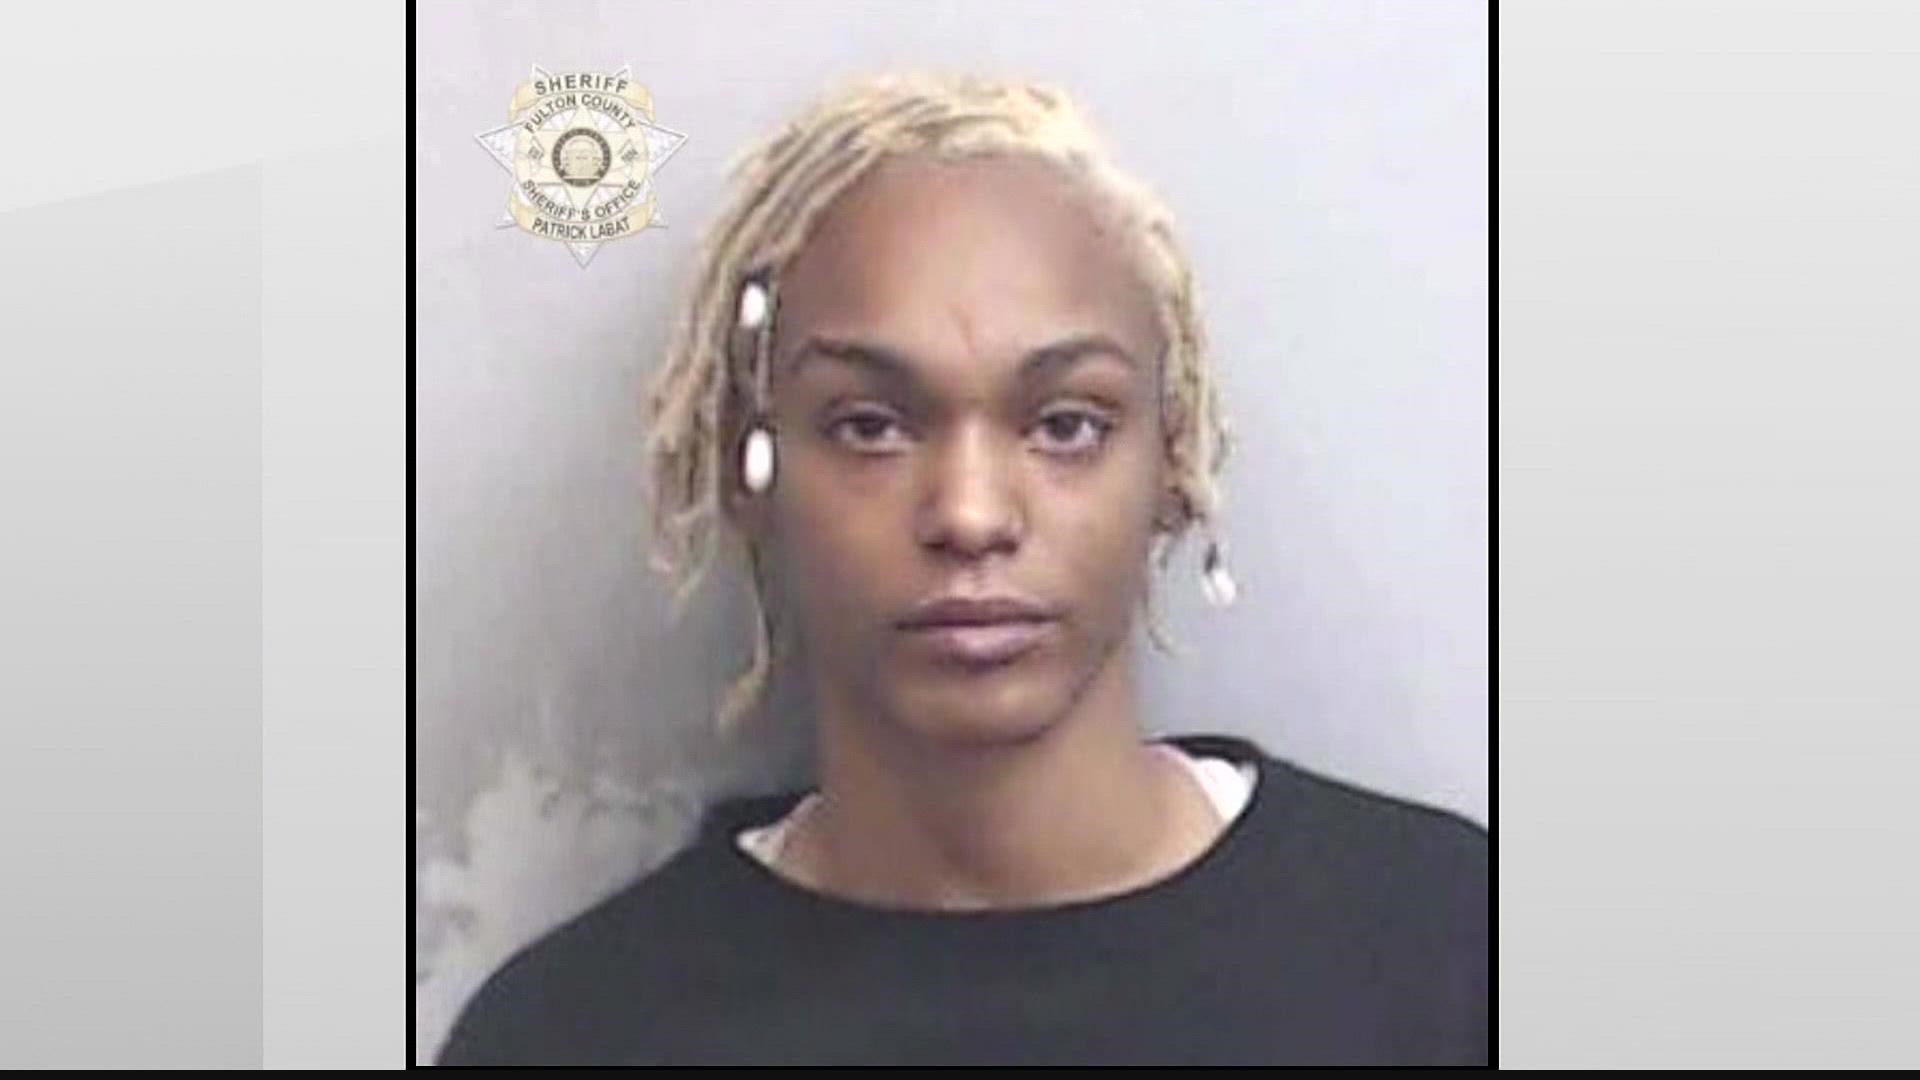 Atlanta Police announced Thursday they had made a second arrest in the killing of a woman at a bowling alley last month.